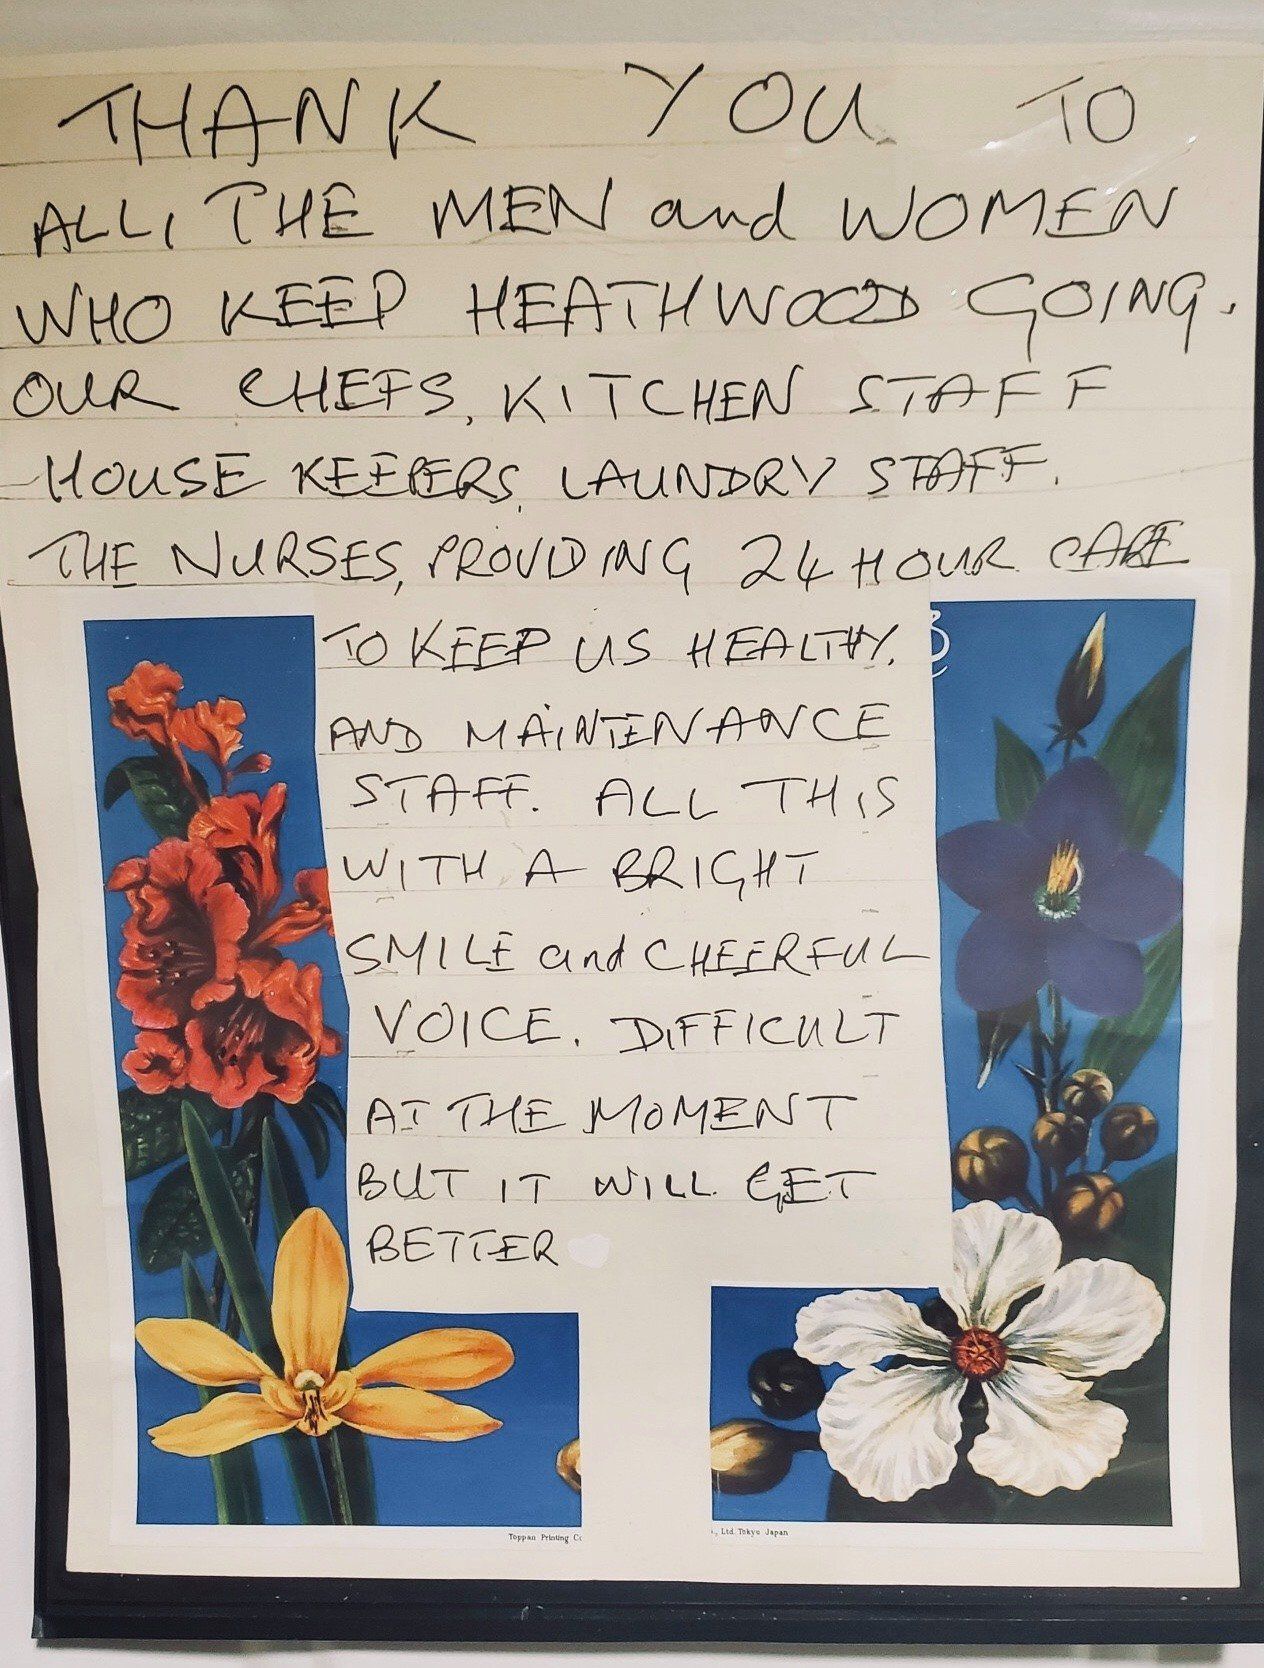 The COVID-10 pandemic in 2020 brought many changes for residents and staff in assisted living residences. The residents and families at Heathwood appreciate the dedication and commitment the staff at Heathwood displayed during the difficult time.